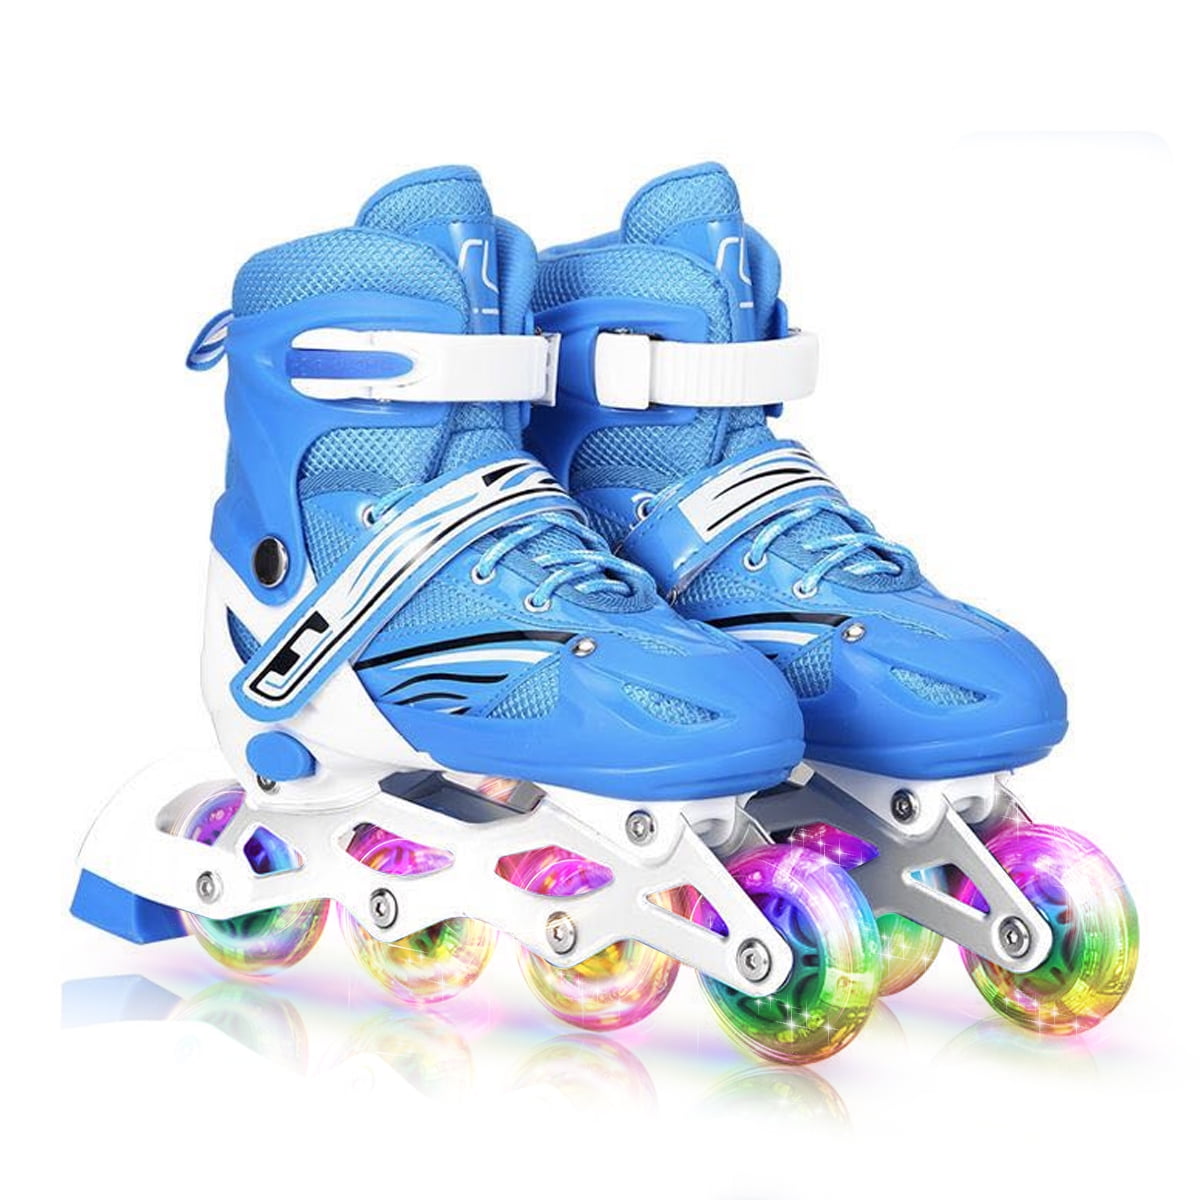 Adjustable Inline Skates for Kids and Adults Men and Women jcaeh 4 Sizes Outdoor Blades Roller Skates with Full Illuminating Light Up Wheels for Girls and Boys